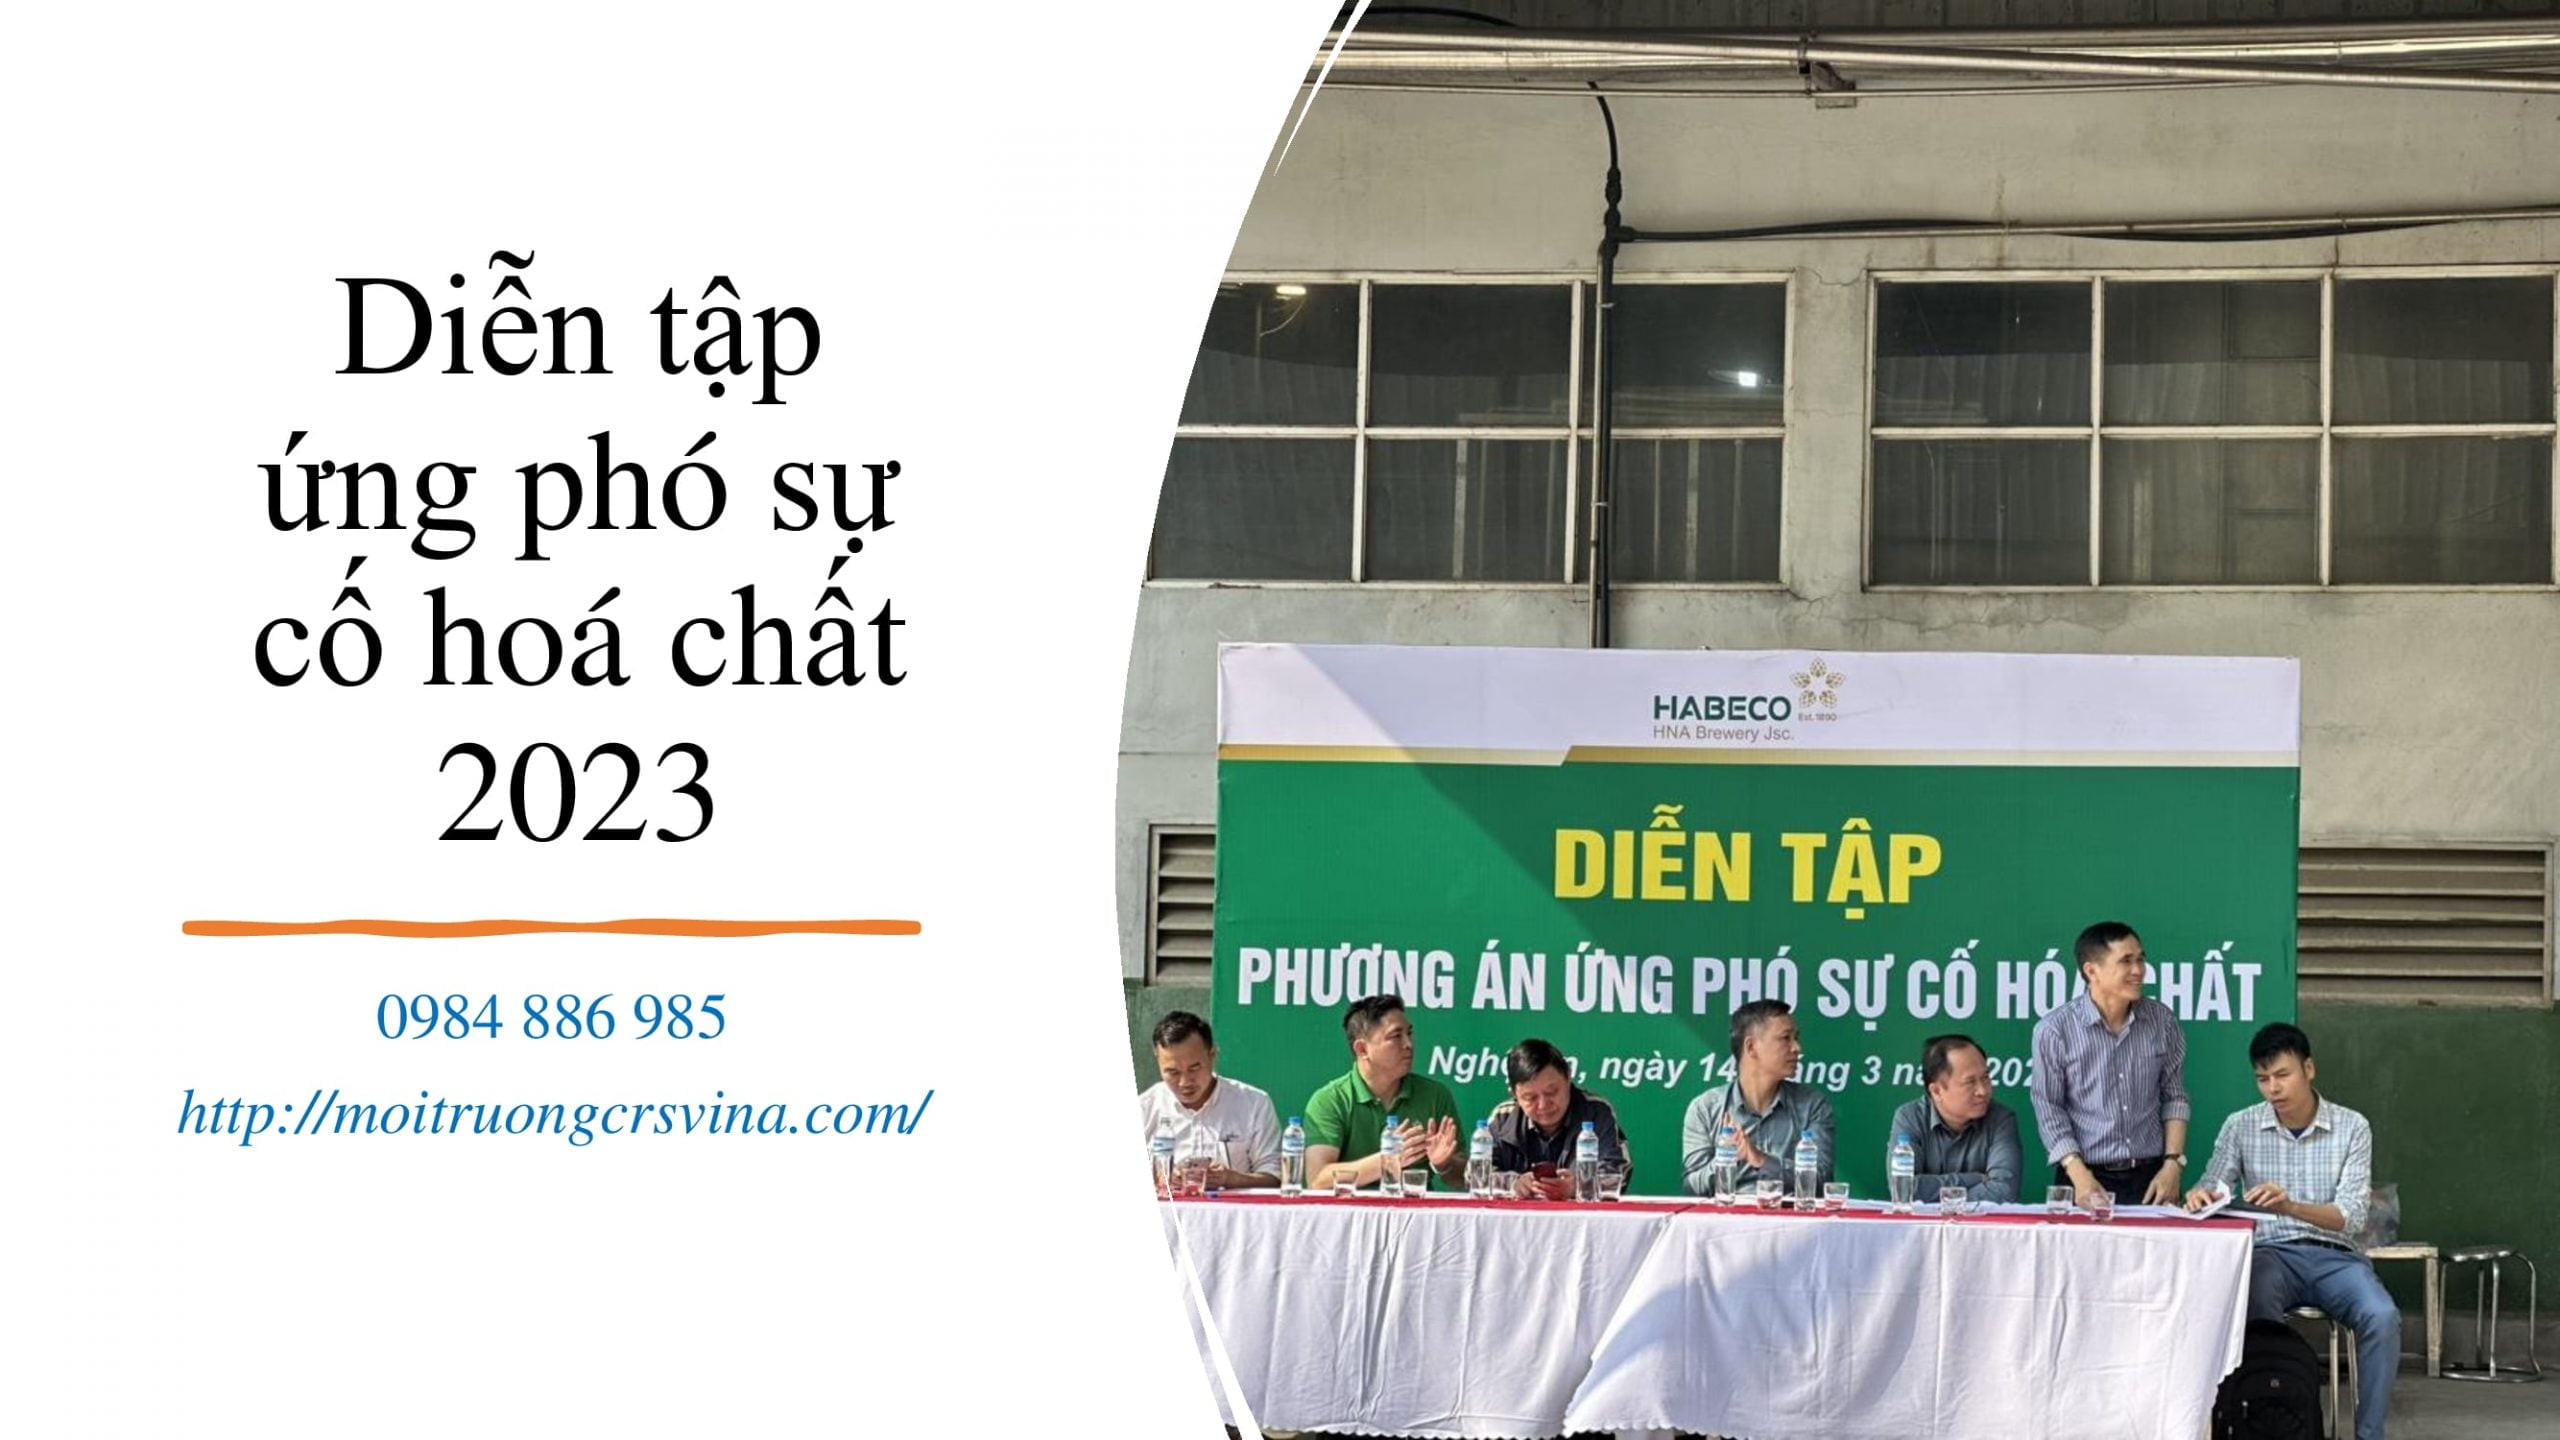 Dien tap ung pho su co hoa chat 2023 scaled